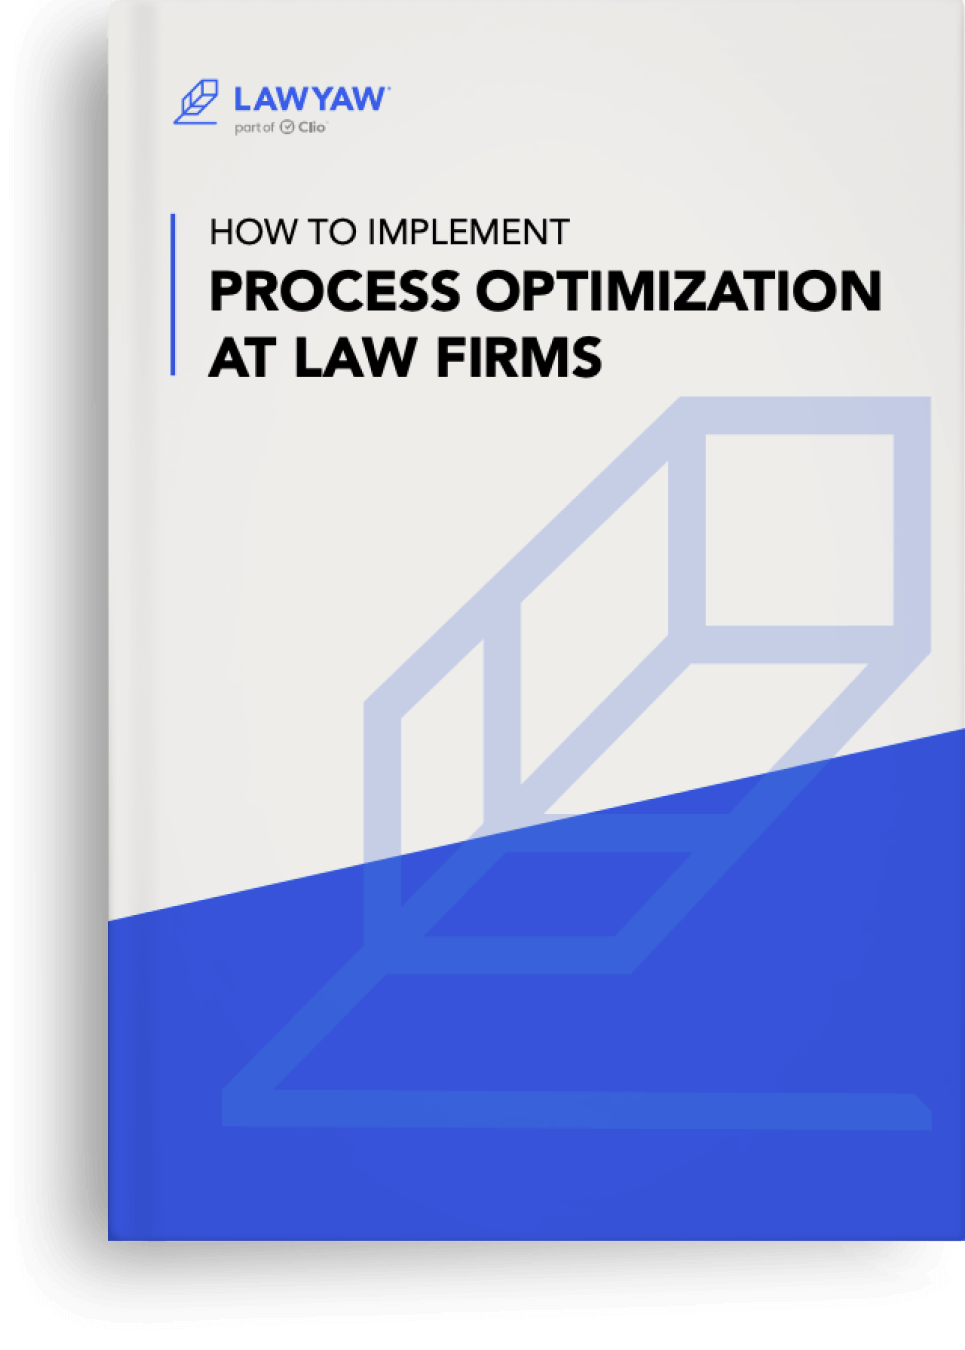 How to Implement Process Optimization at Law Firms